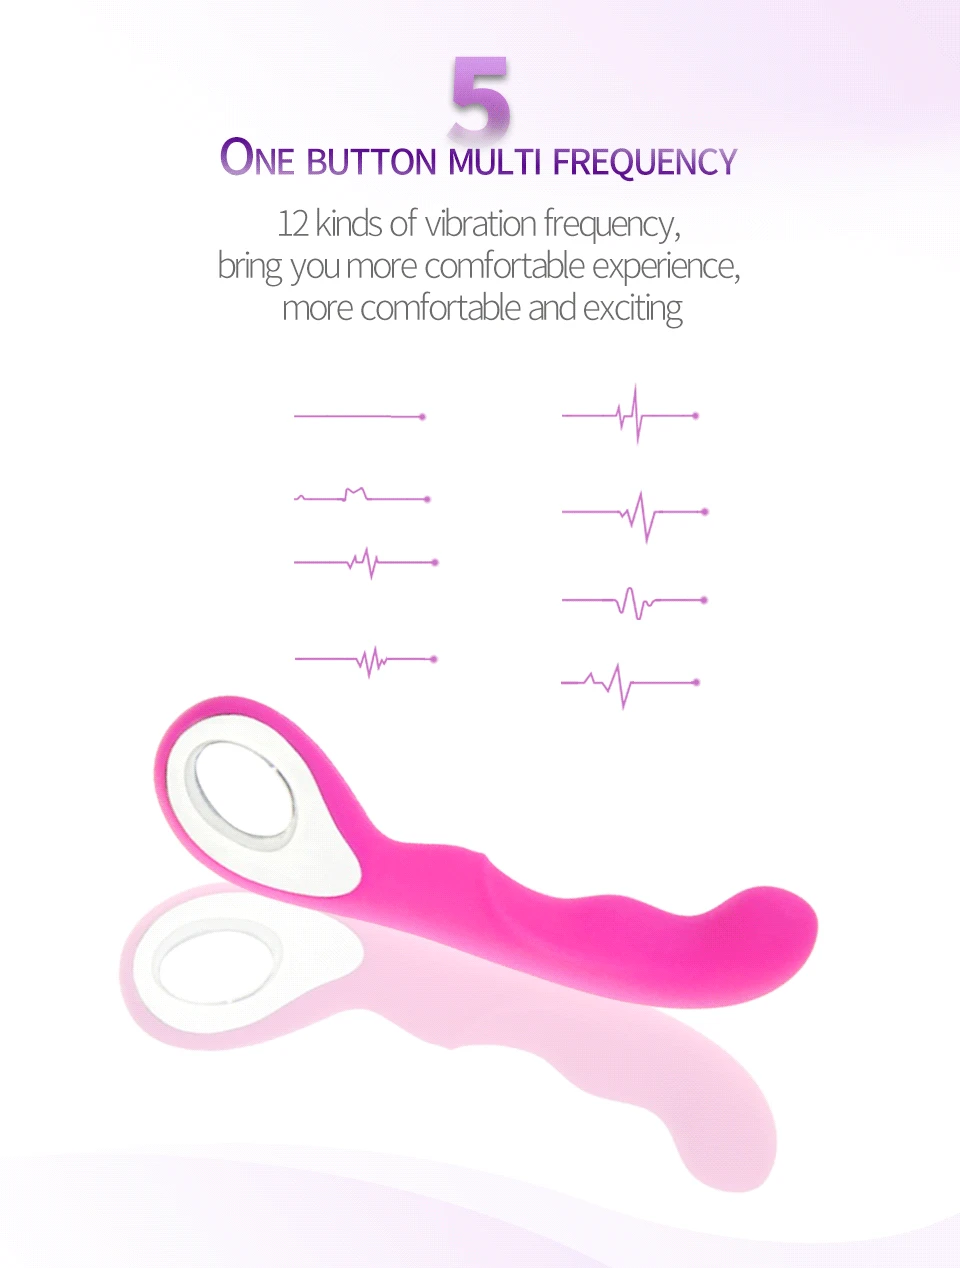 Silicone Adult Sex Toy ohmibod sex toys with Adjustable